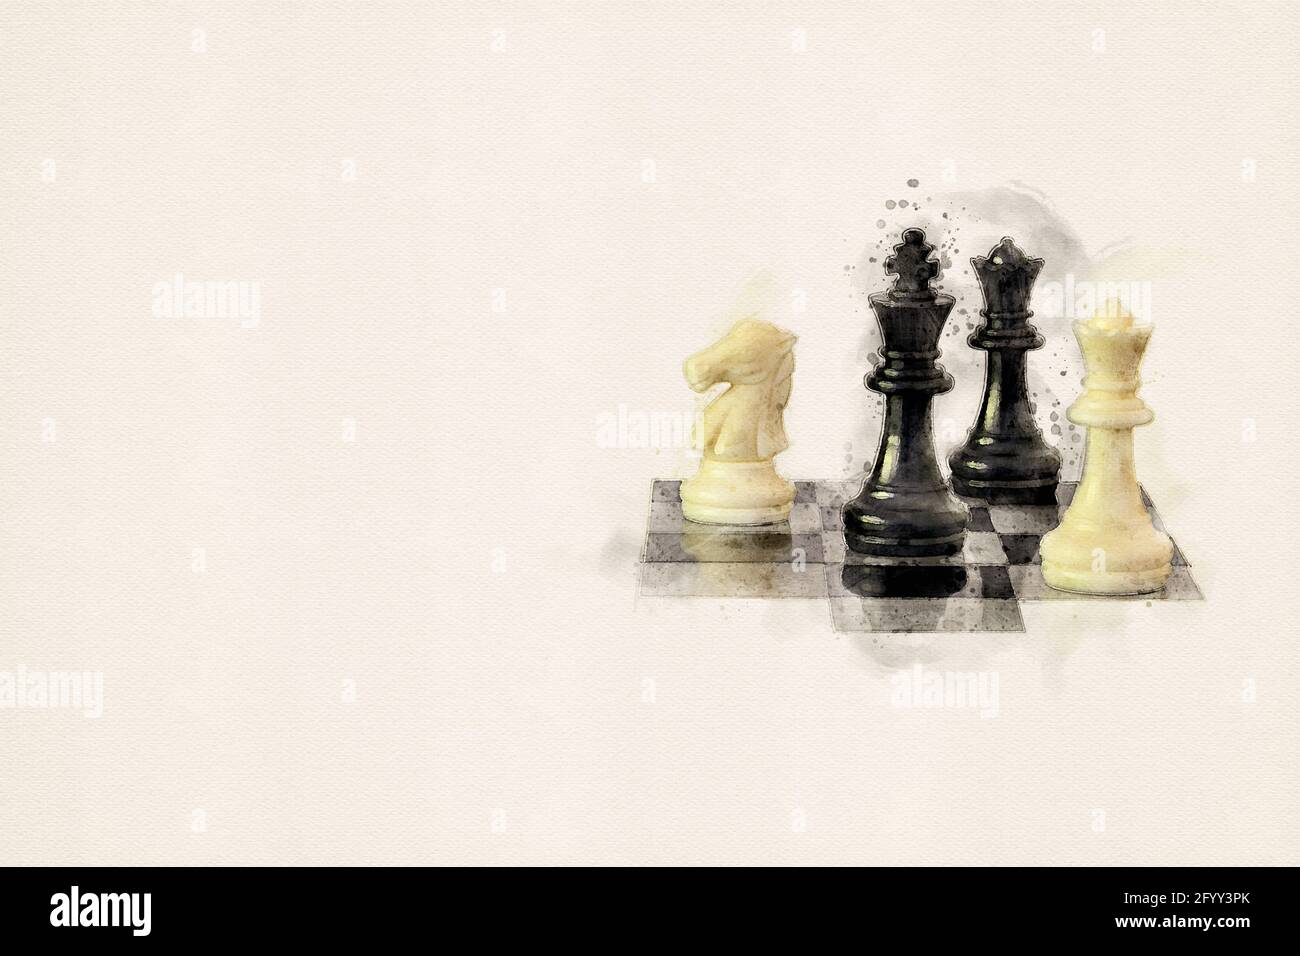 Chess game. Chess pieces on chess board, isolated with copy space. Aquarelle, watercolor illustration. Stock Photo